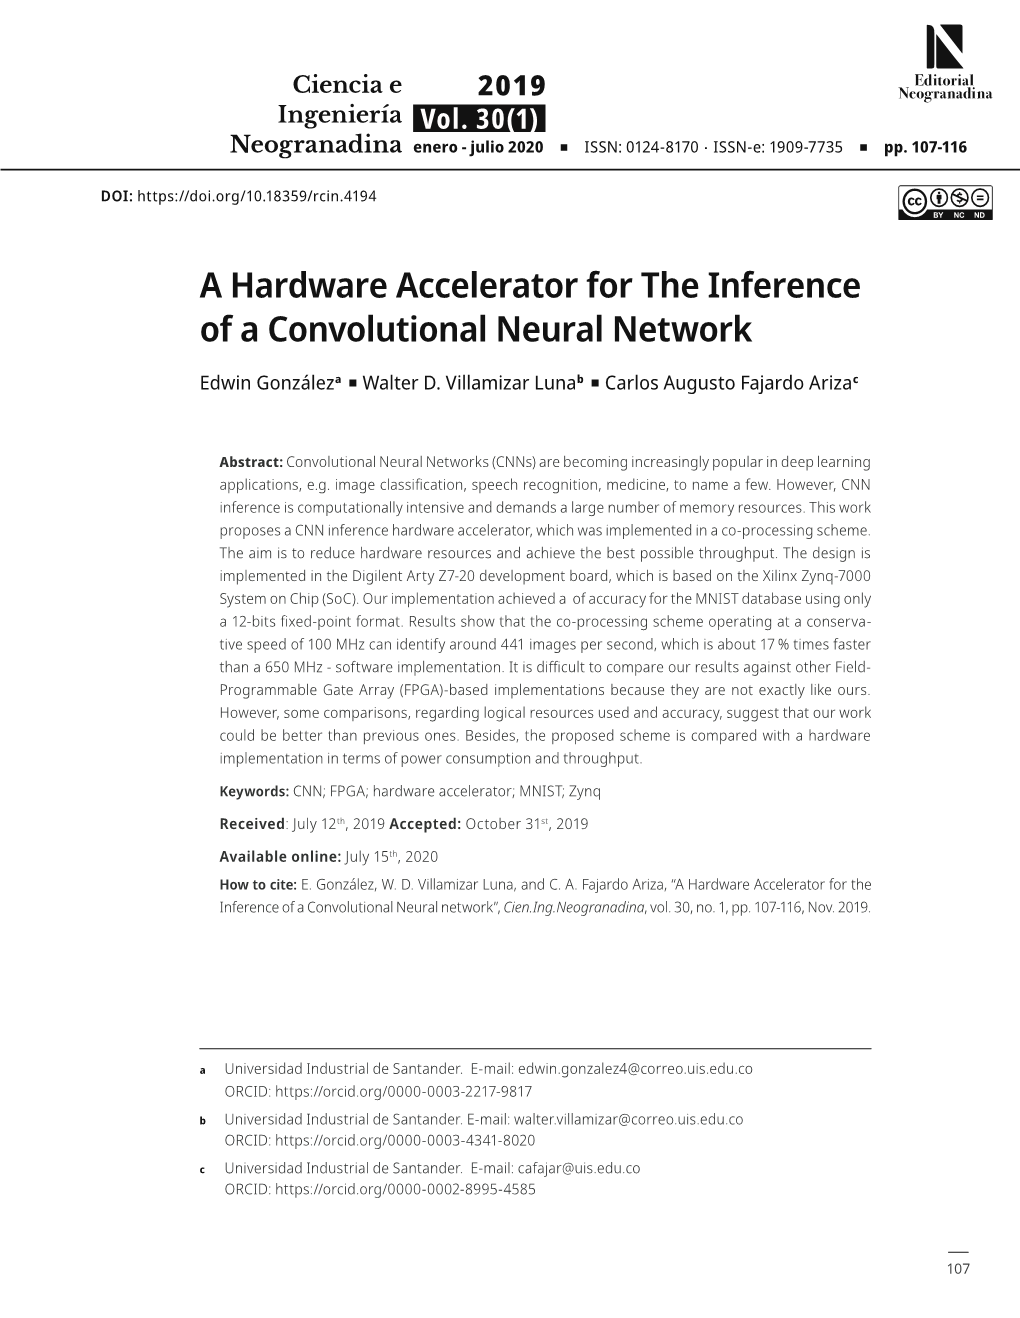 A Hardware Accelerator for the Inference of a Convolutional Neural Network